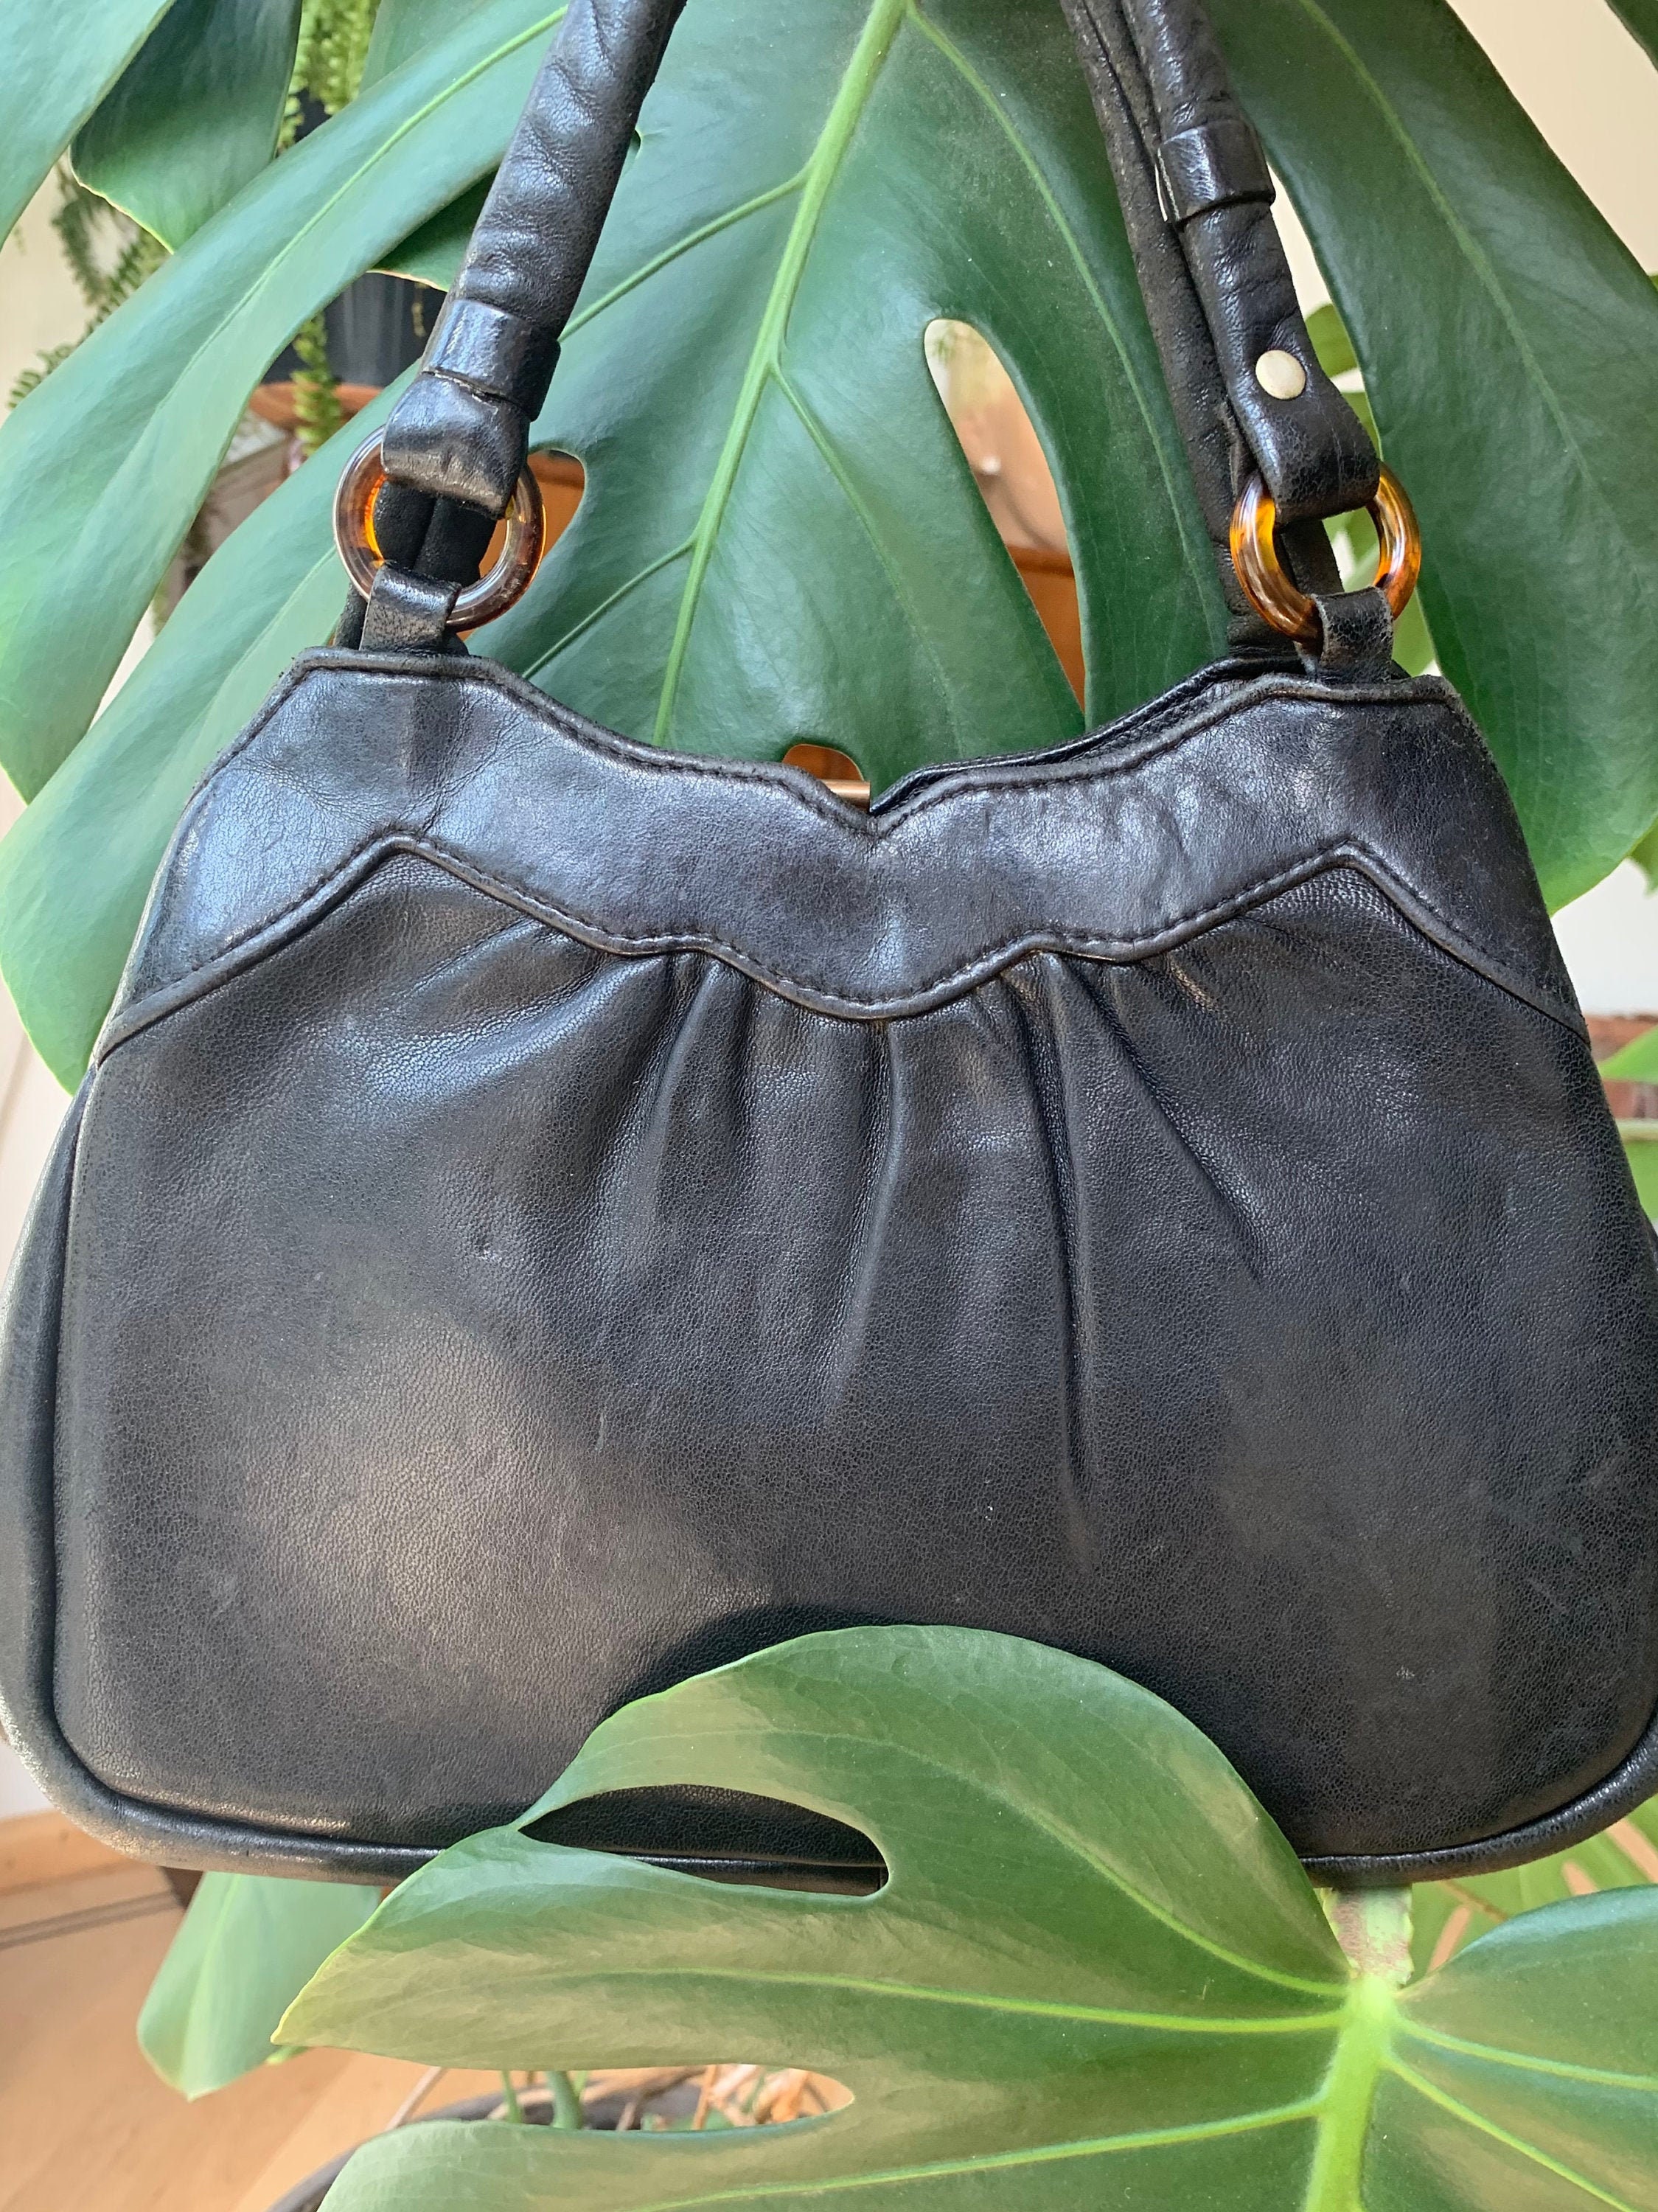 Vintage Bag Garay in Faux Black Patent Leather with Faux Tortoiseshell  Handles | Vintage bags, Vintage evening bags, Bags